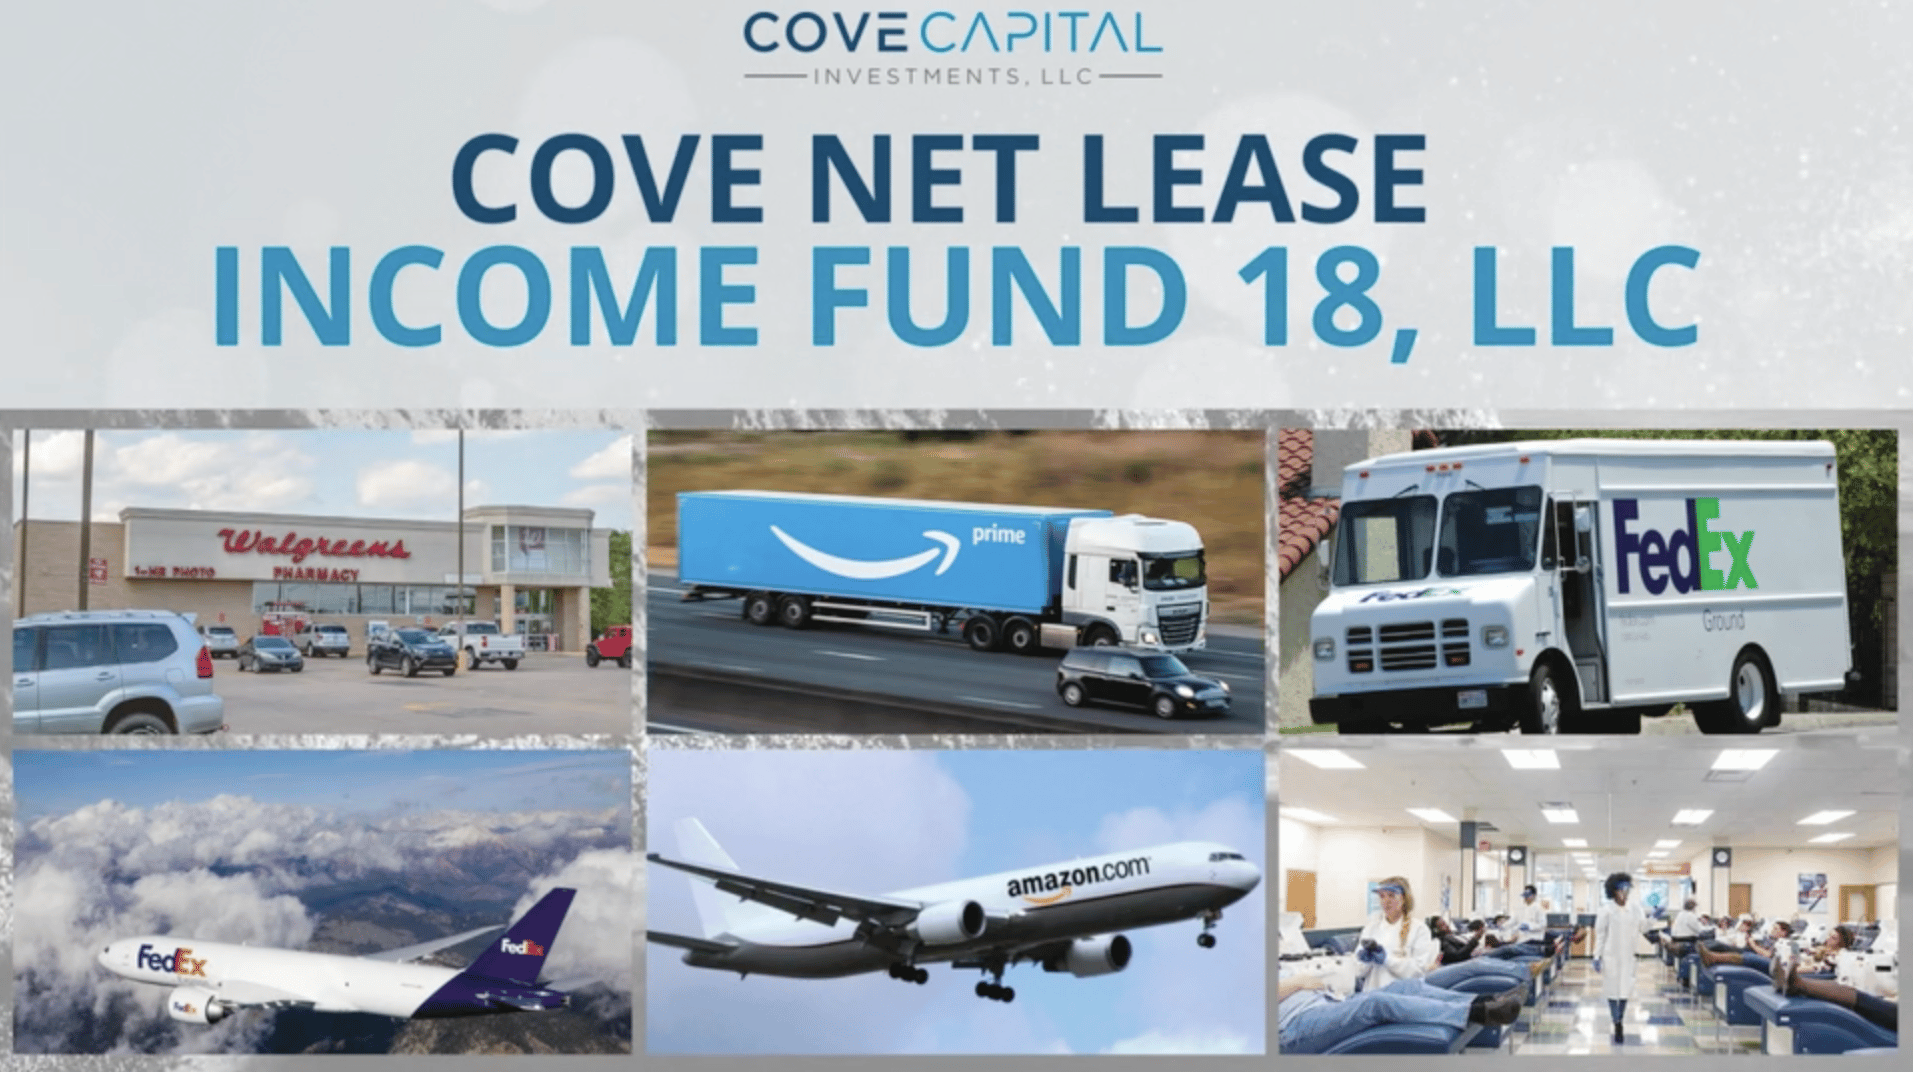 Featured image for “Cove Net Lease Income Fund 18, LLC Video”